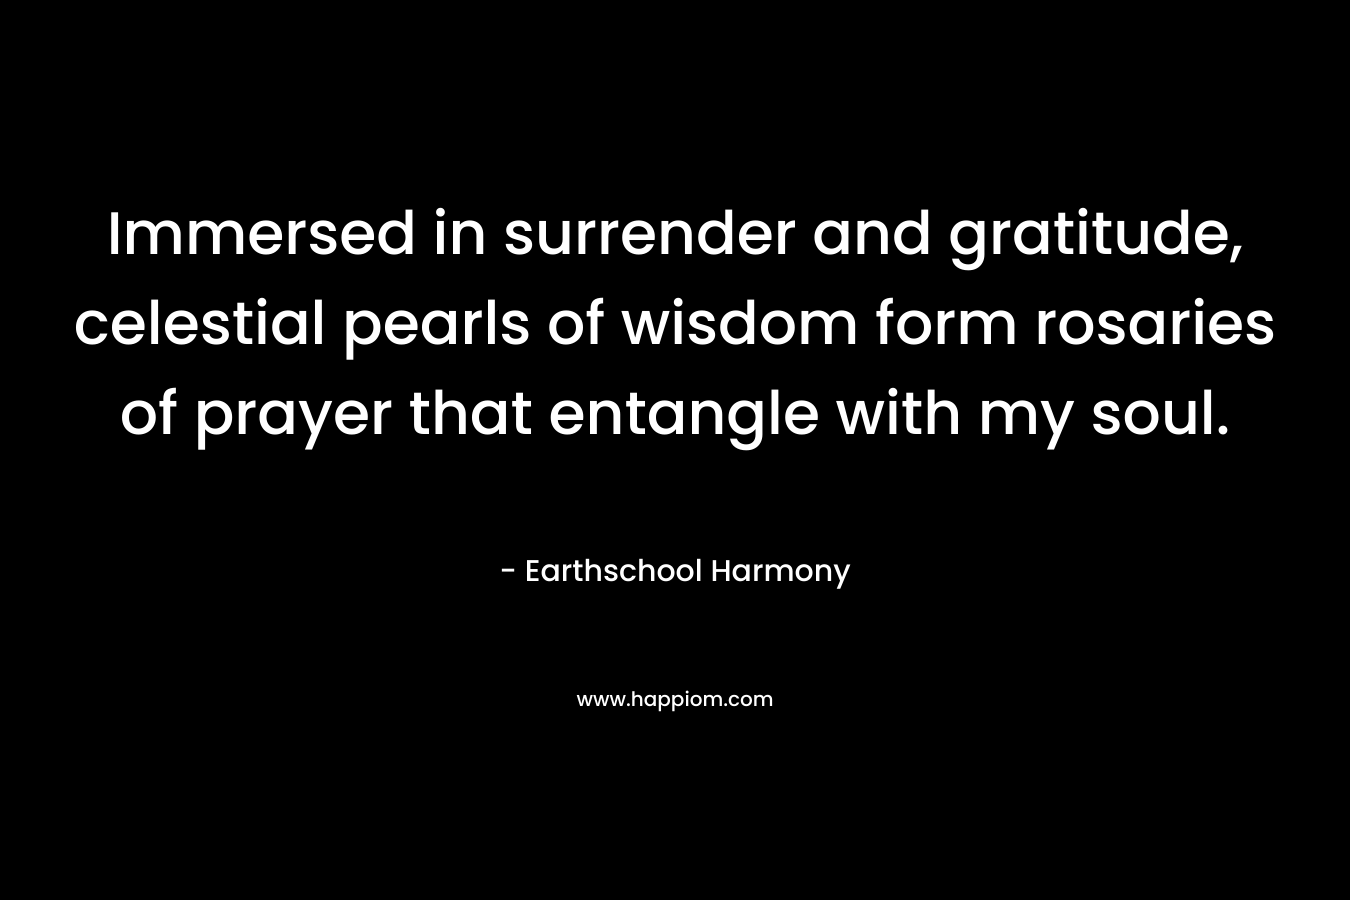 Immersed in surrender and gratitude, celestial pearls of wisdom form rosaries of prayer that entangle with my soul.